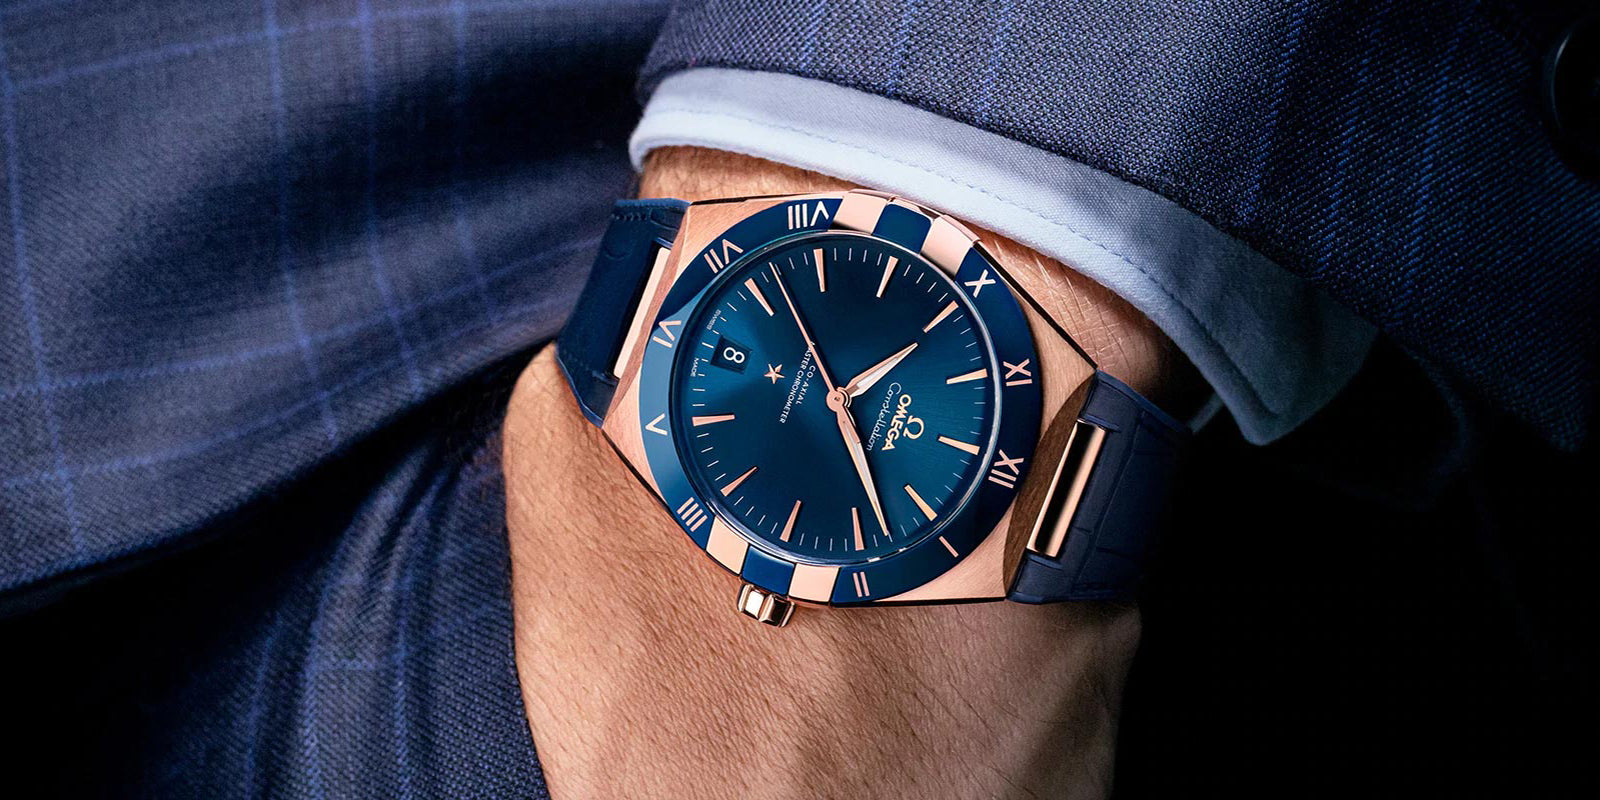 The Omega Constellation